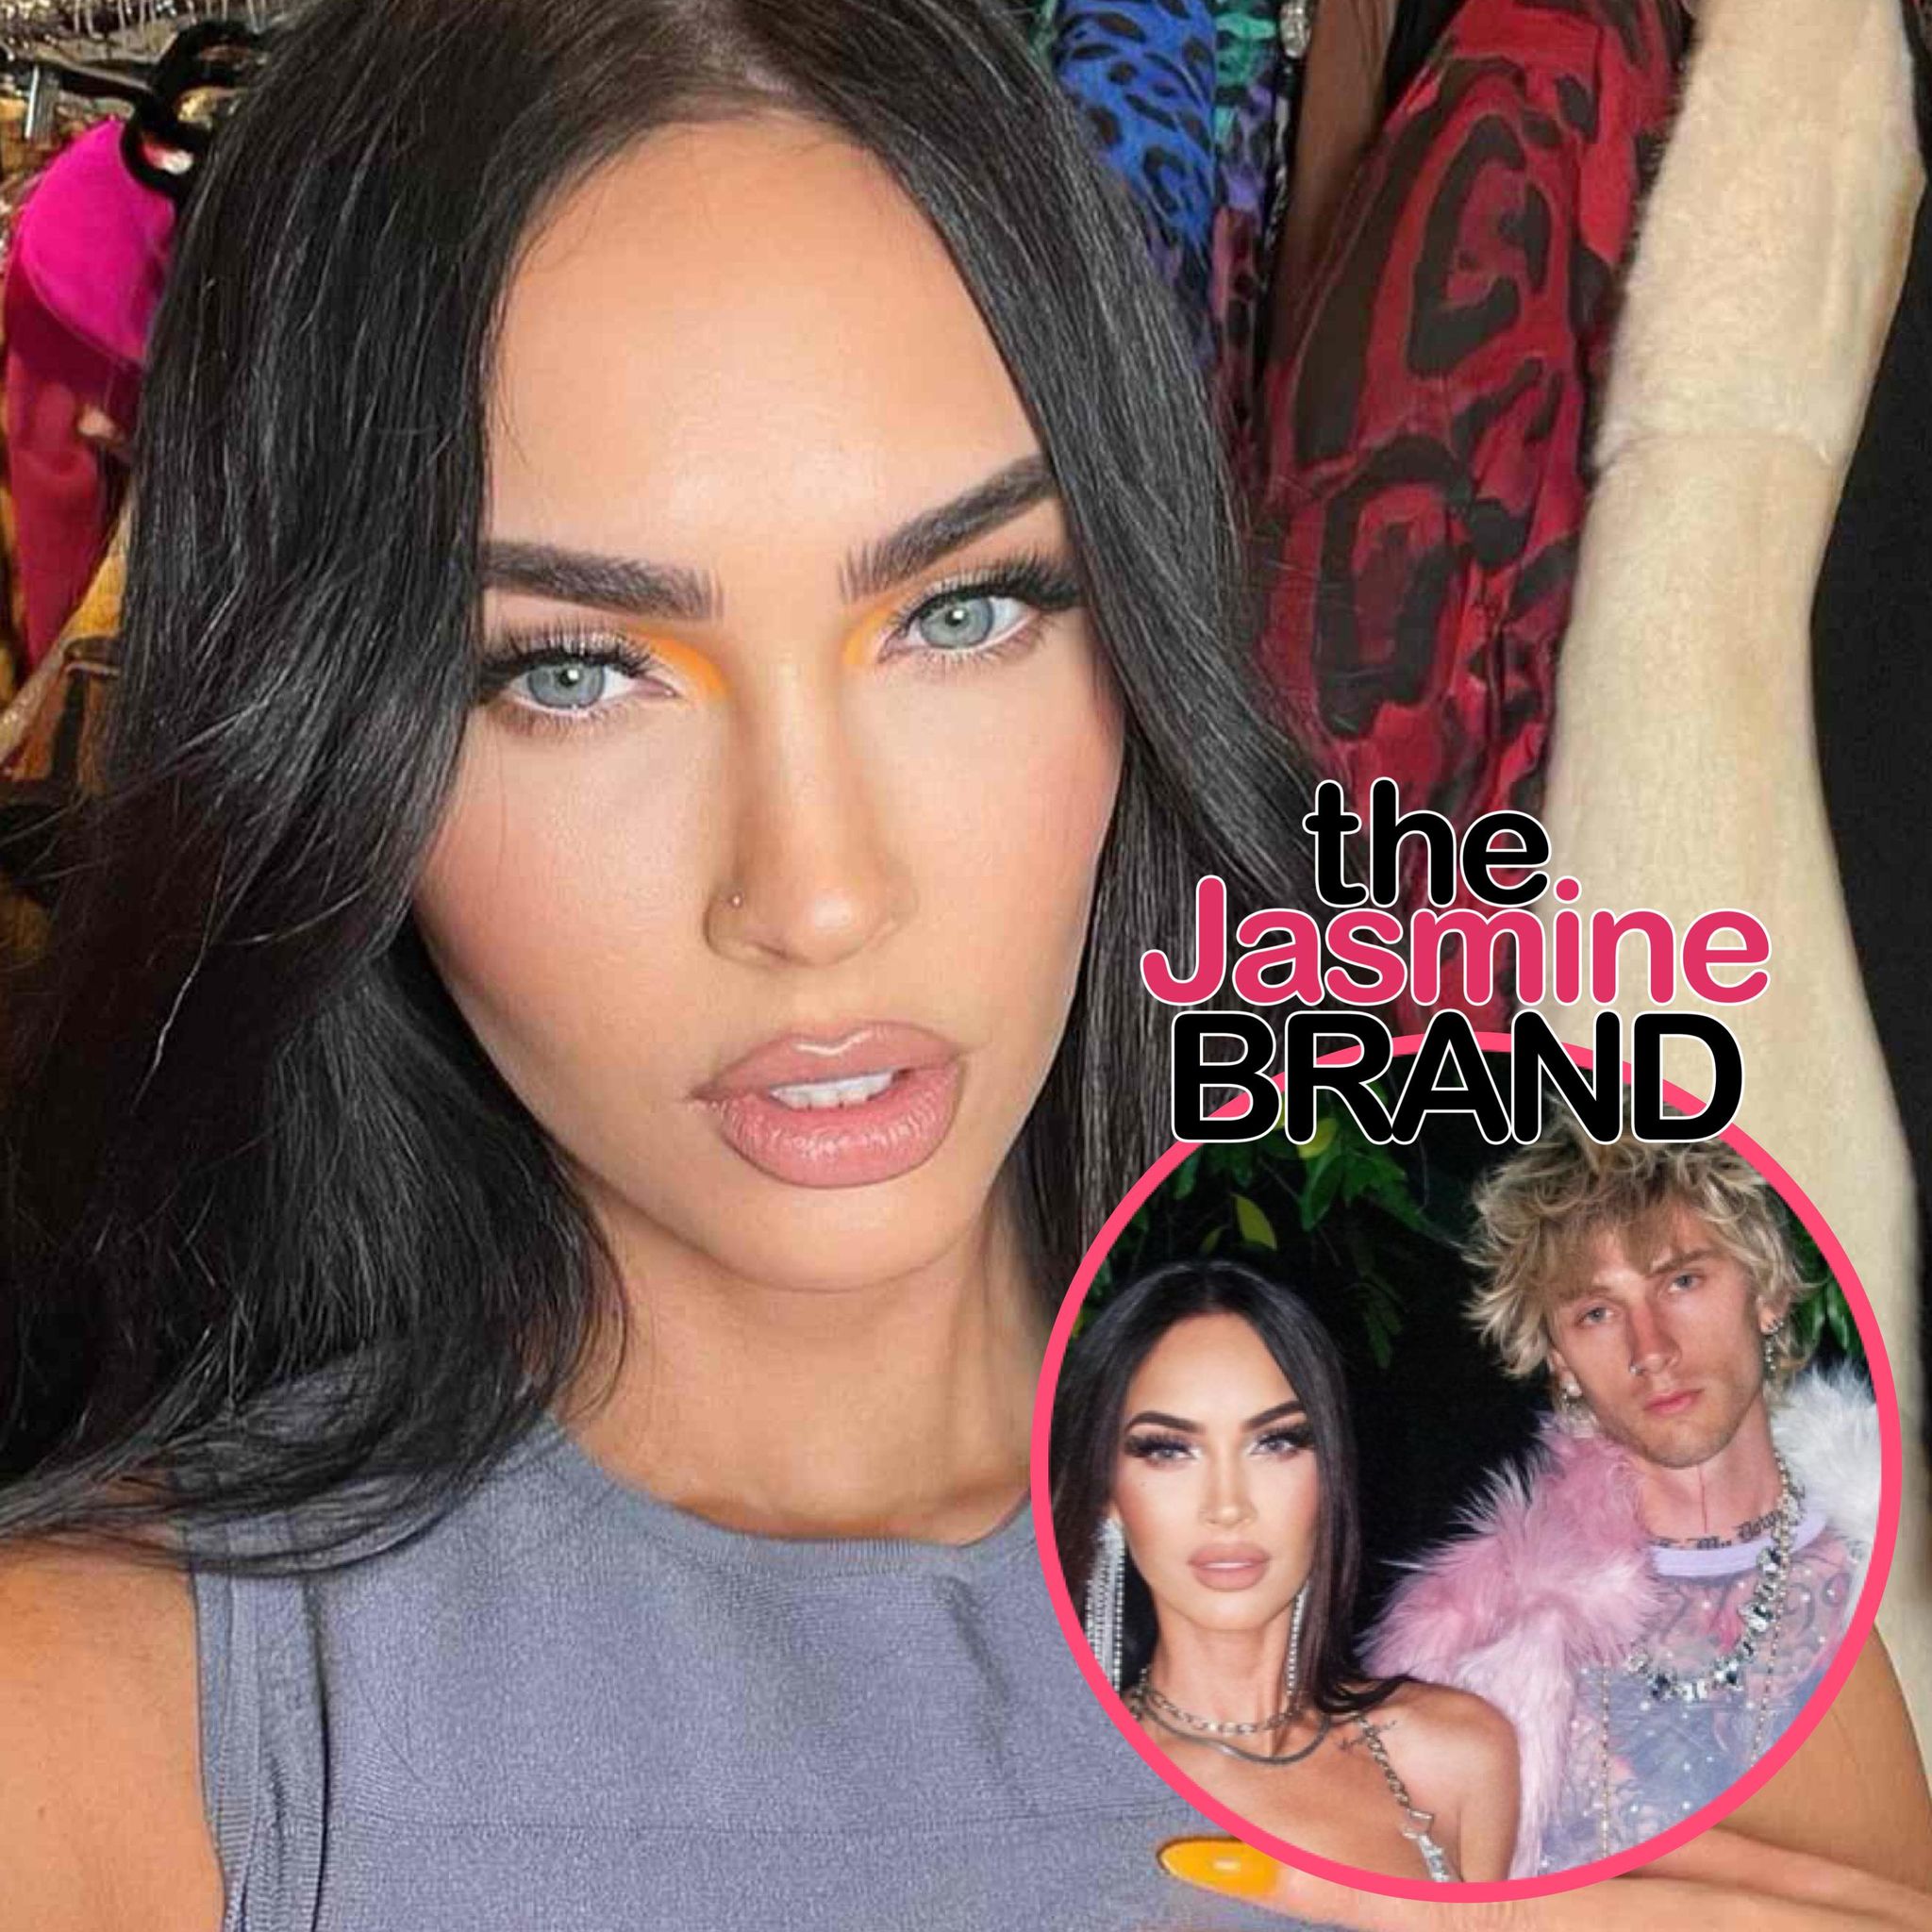 Megan Fox Tg Porn Caption - Megan Fox & Machine Gun Kelly Haven't 'Called Off' Engagement Despite  Actress Wiping Rapper From Her IG Page & Sharing Cryptic Post, Source  Claims - theJasmineBRAND